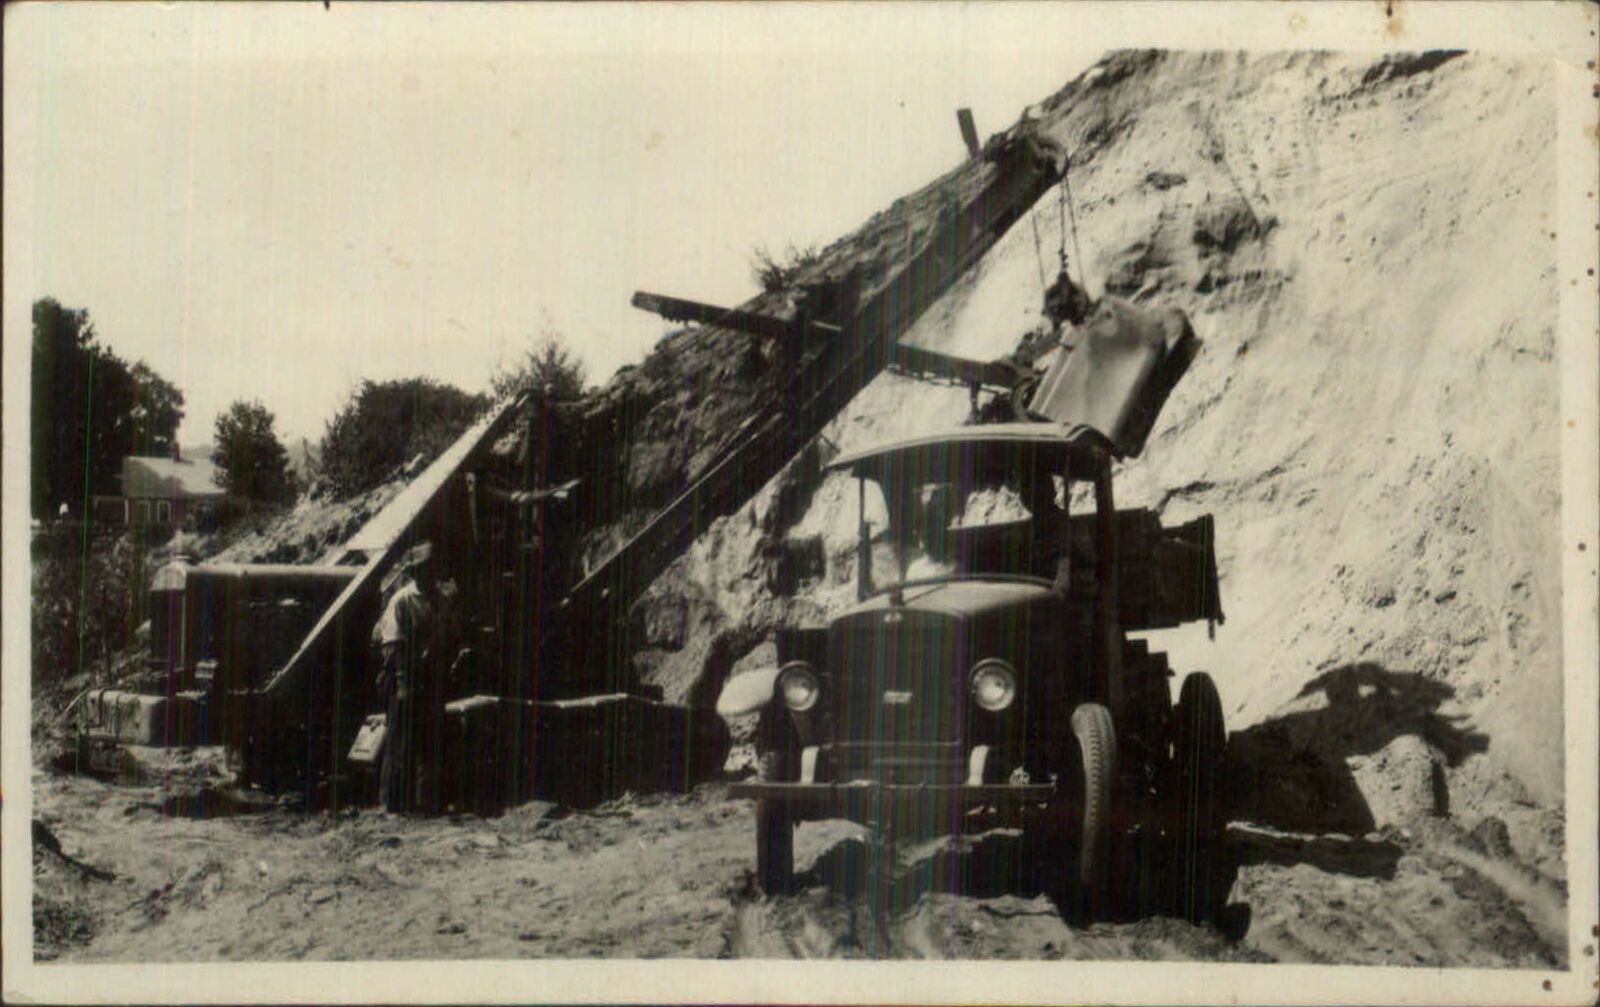 Crane Loading Early Truck - Ford or Chevy c1920s Real Photo Postcard